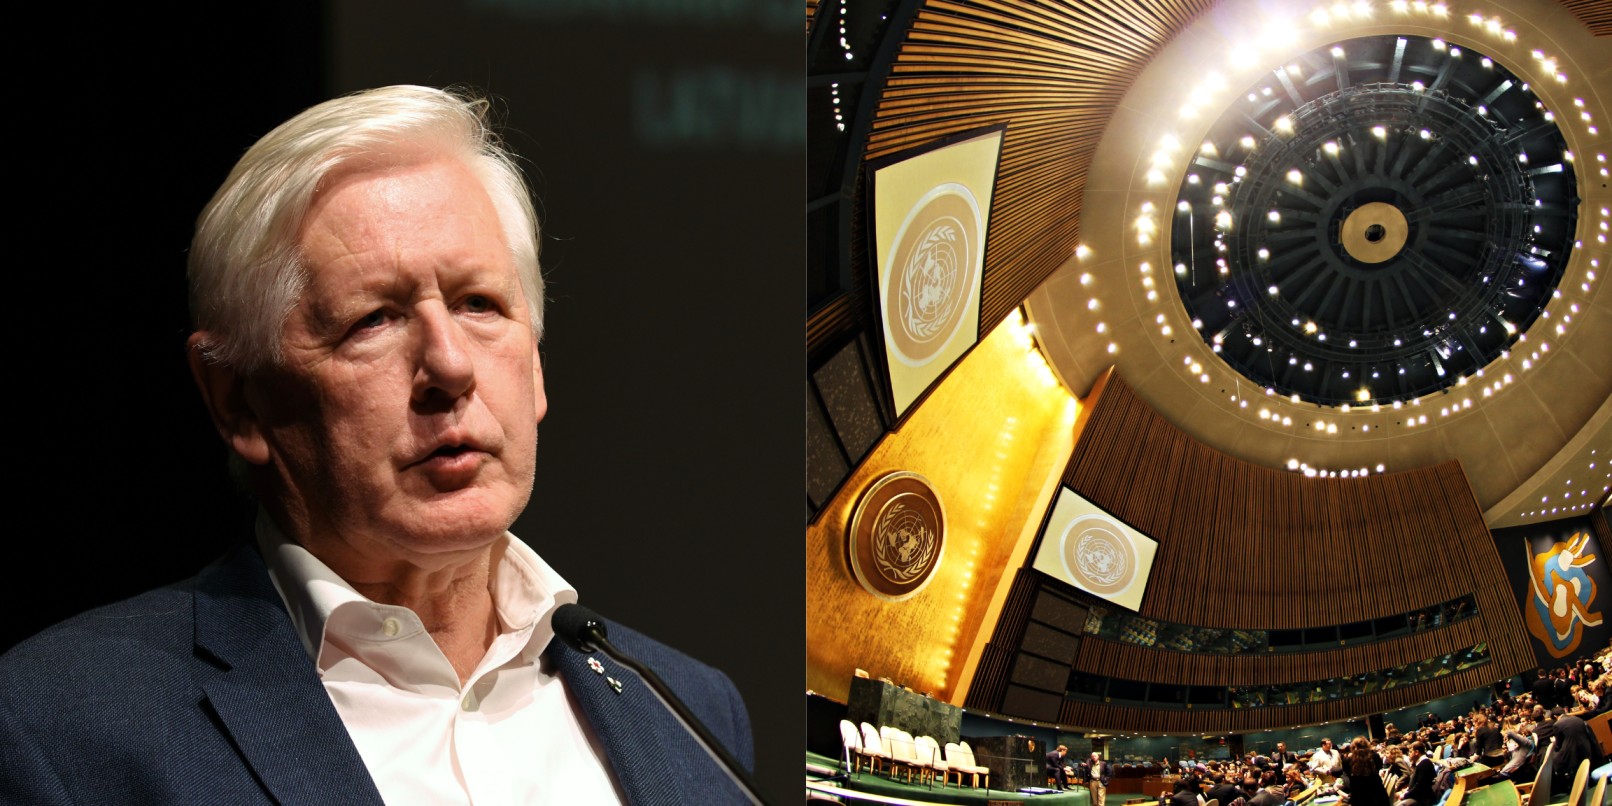 Interview: Canadian UN Ambassador Bob Rae on Contemporary Challenges to the Rules-Based International Order